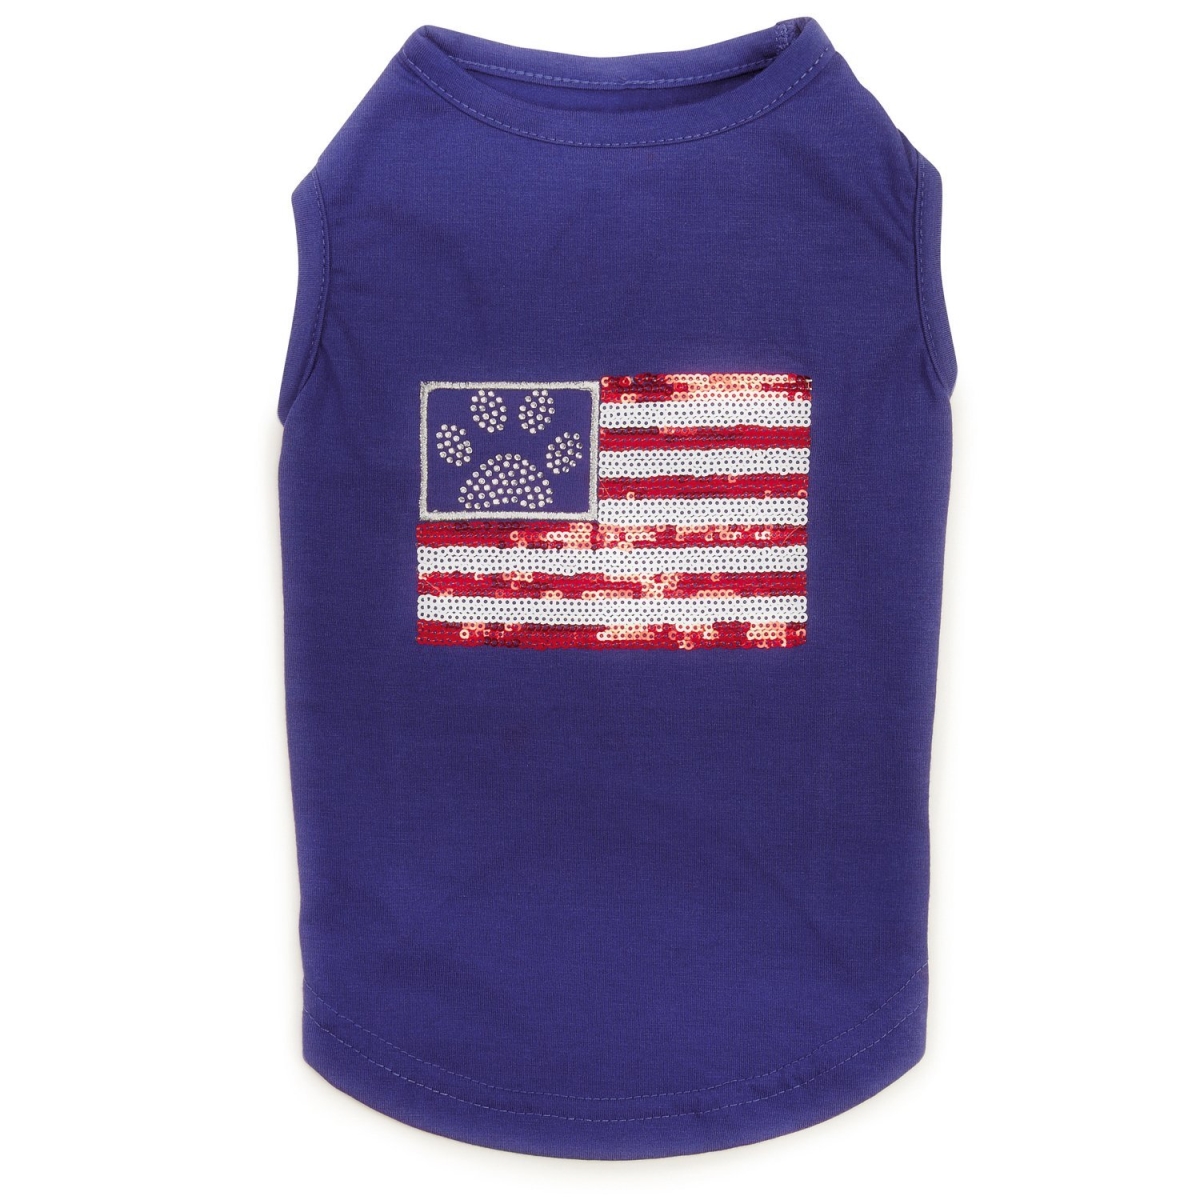 Zack & Zoey Sequin Flag Upf40 Tank Top For Dogs, Blue - Large